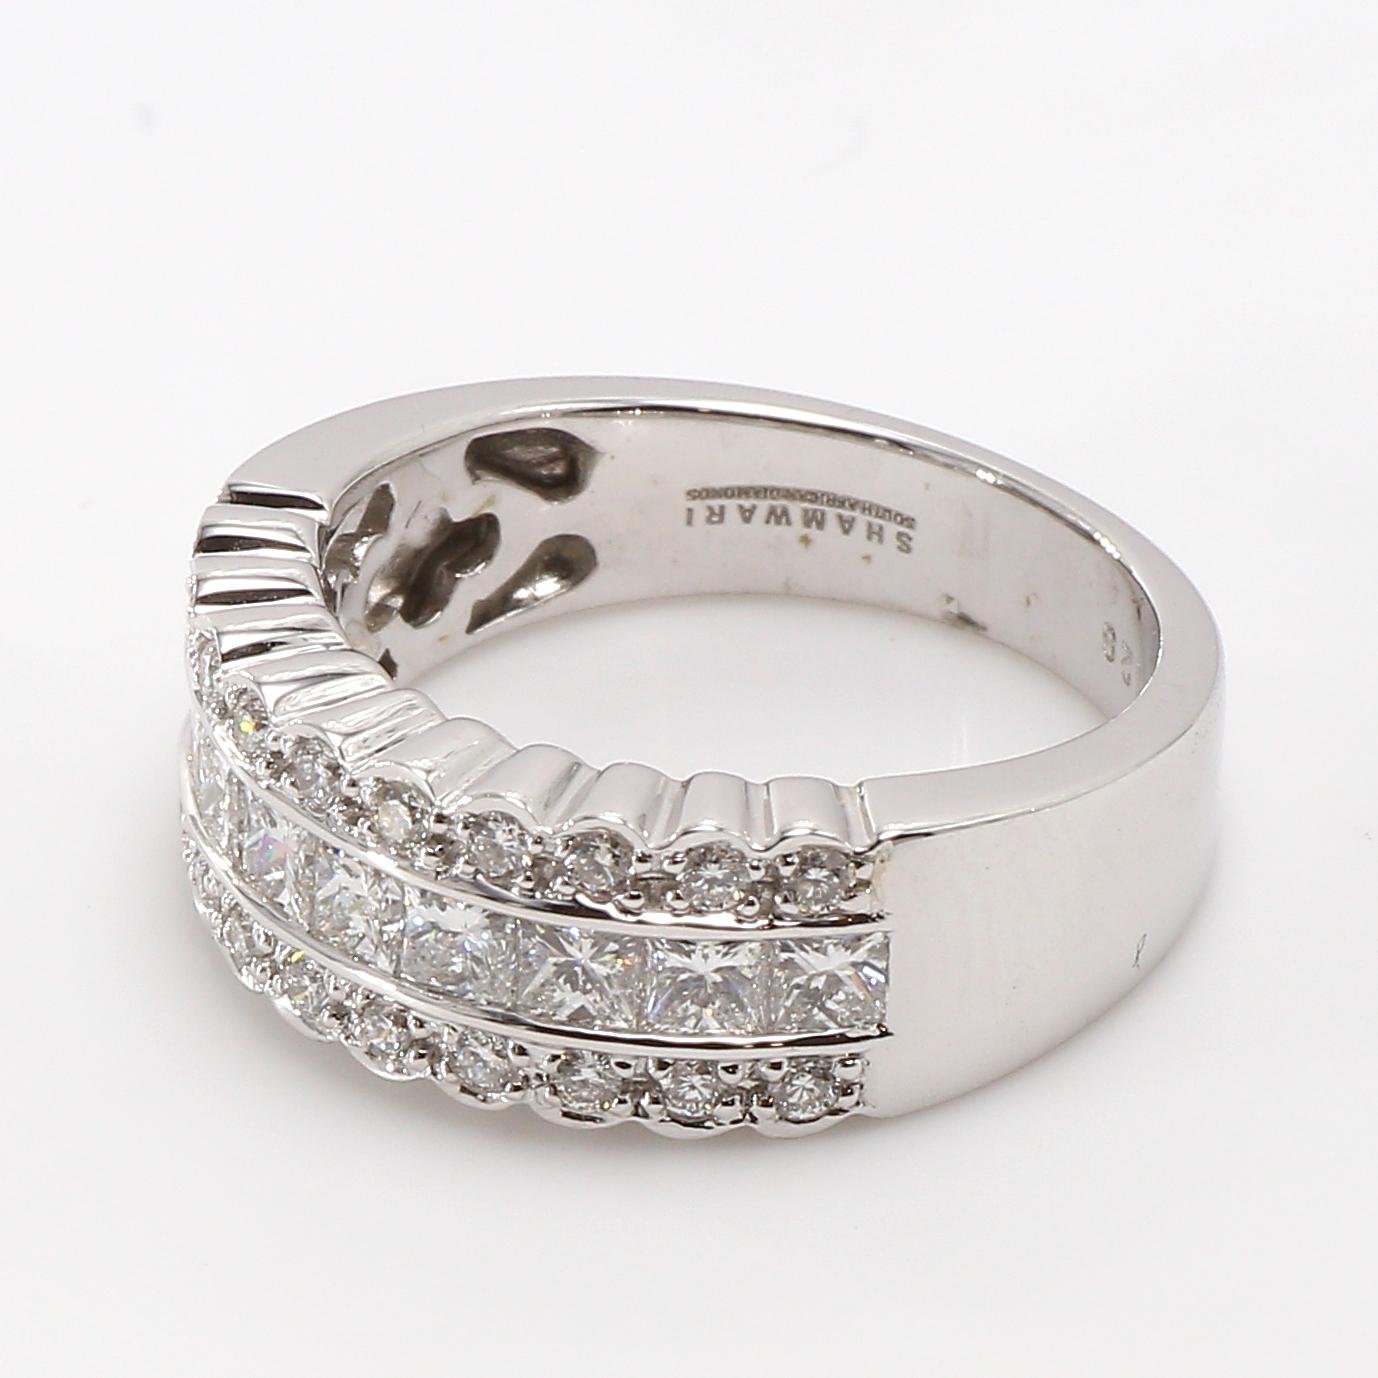 Beautifully crafted 18 Karat White Gold Half Eternity Ring.
Set with Princess Brilliant Cut White Diamonds 0.99 ct  H-I color, VS-SI clarity and Round Brilliant Cut White Diamonds 0.29 ct H-I color VS-SI clarity.
Size 7 USA. Ready to ship today, an